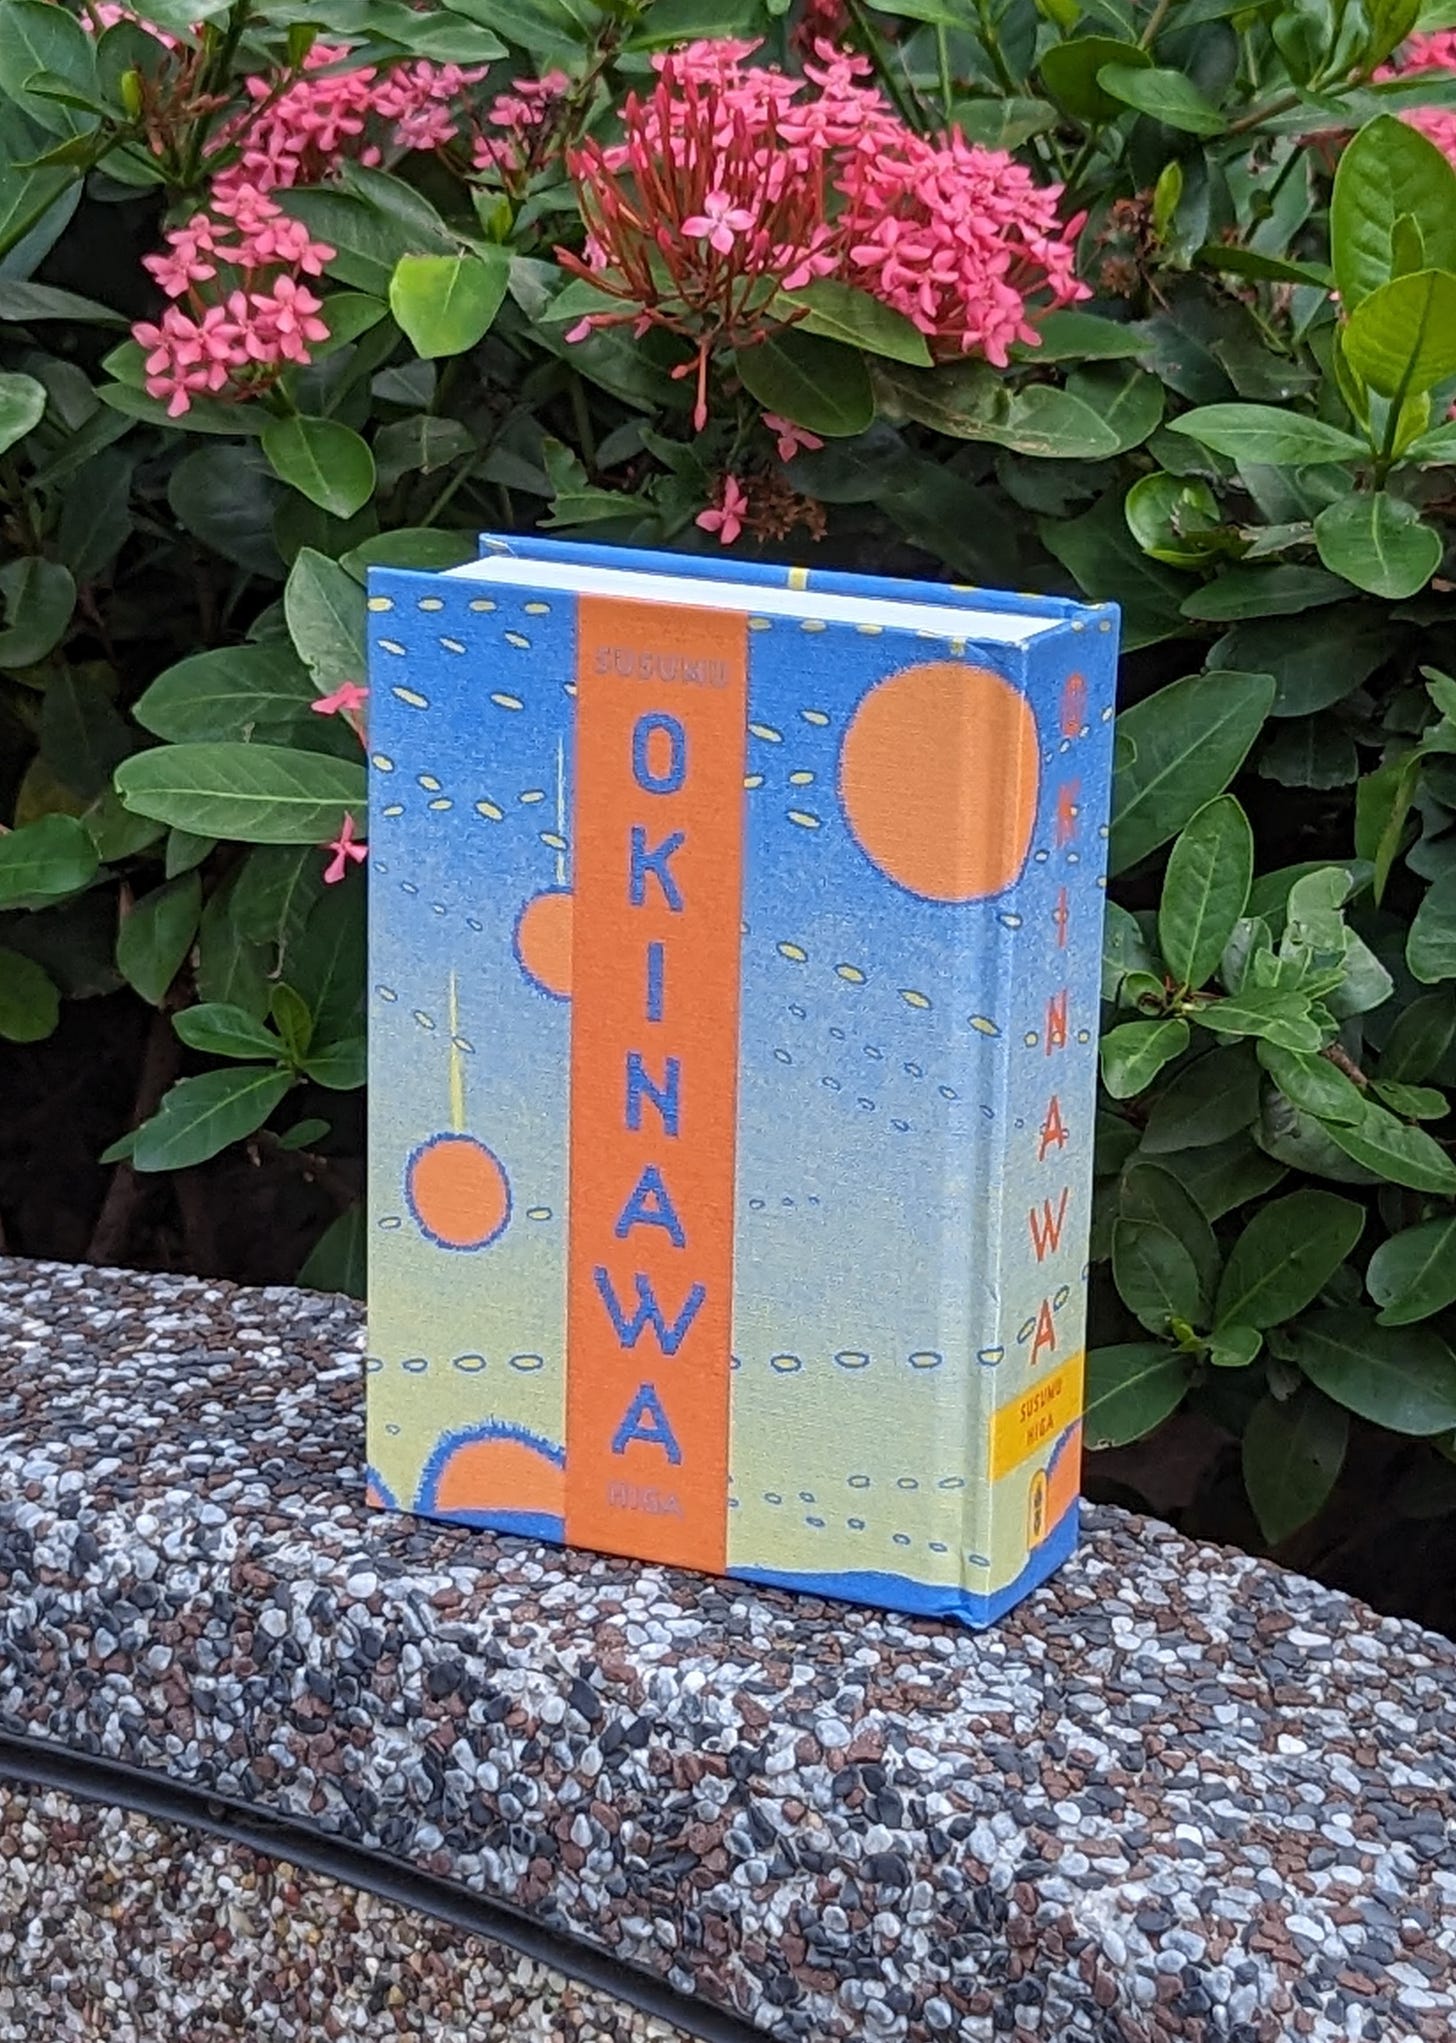 Okinawa' by Susumu Higa Arrives In Stores August 22nd!